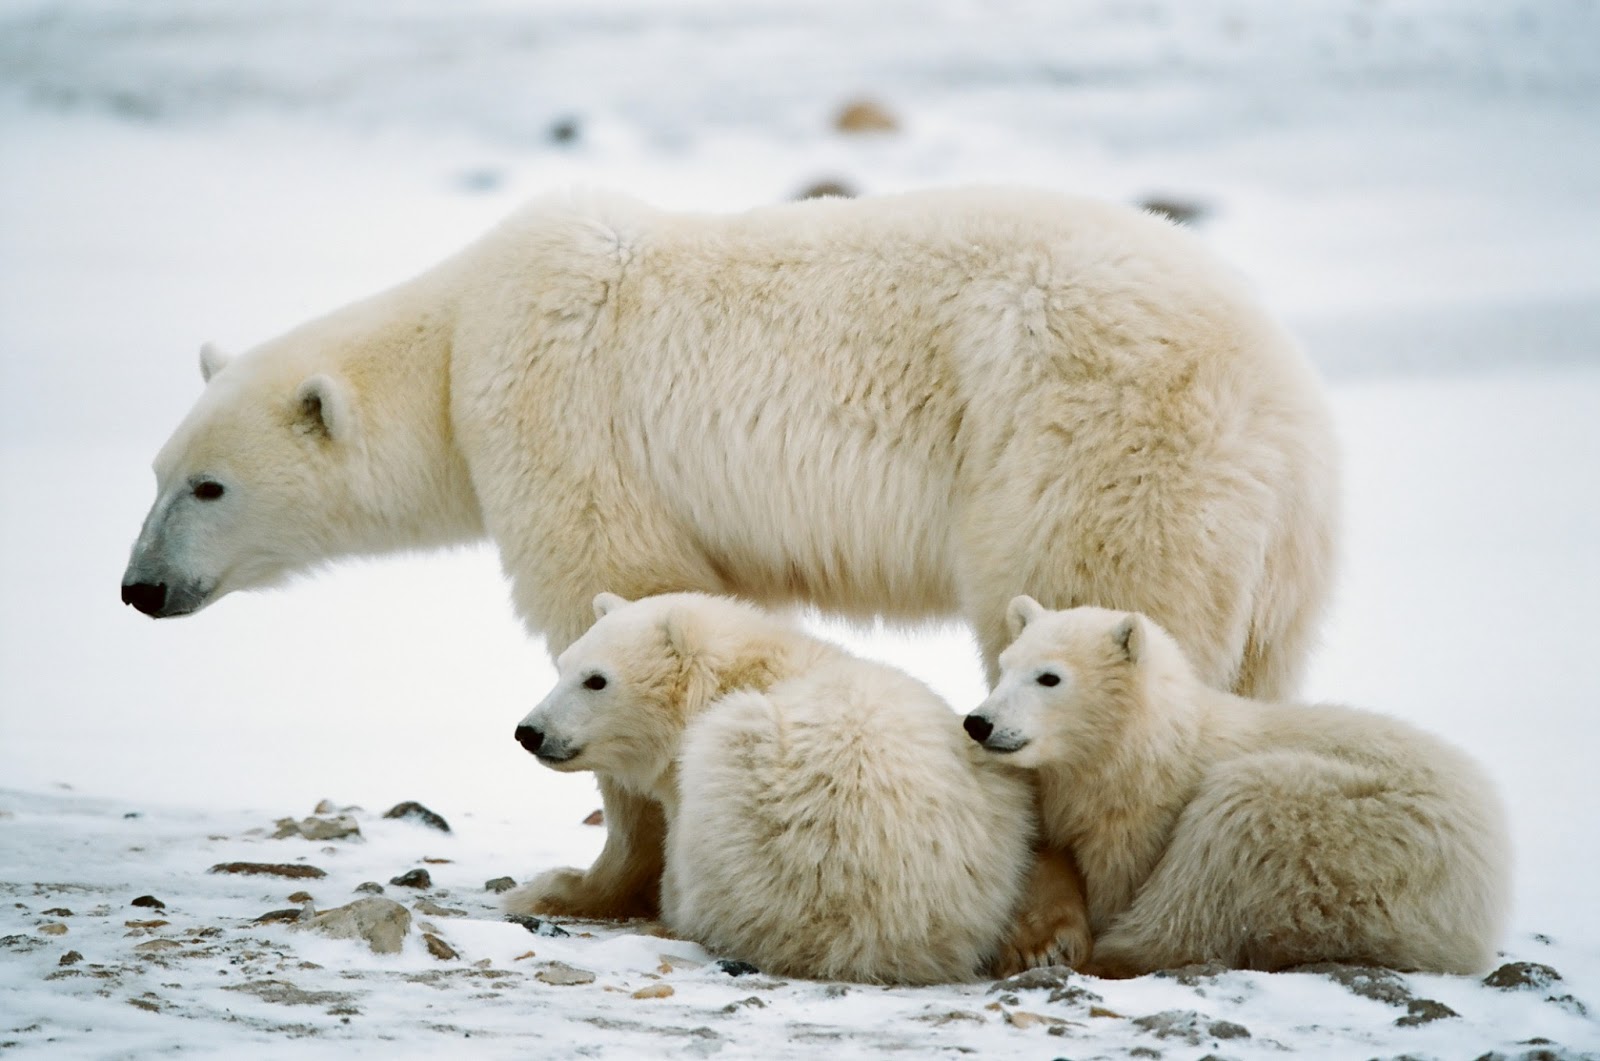 All About Animal Wildlife: Polar Bear Facts and Images